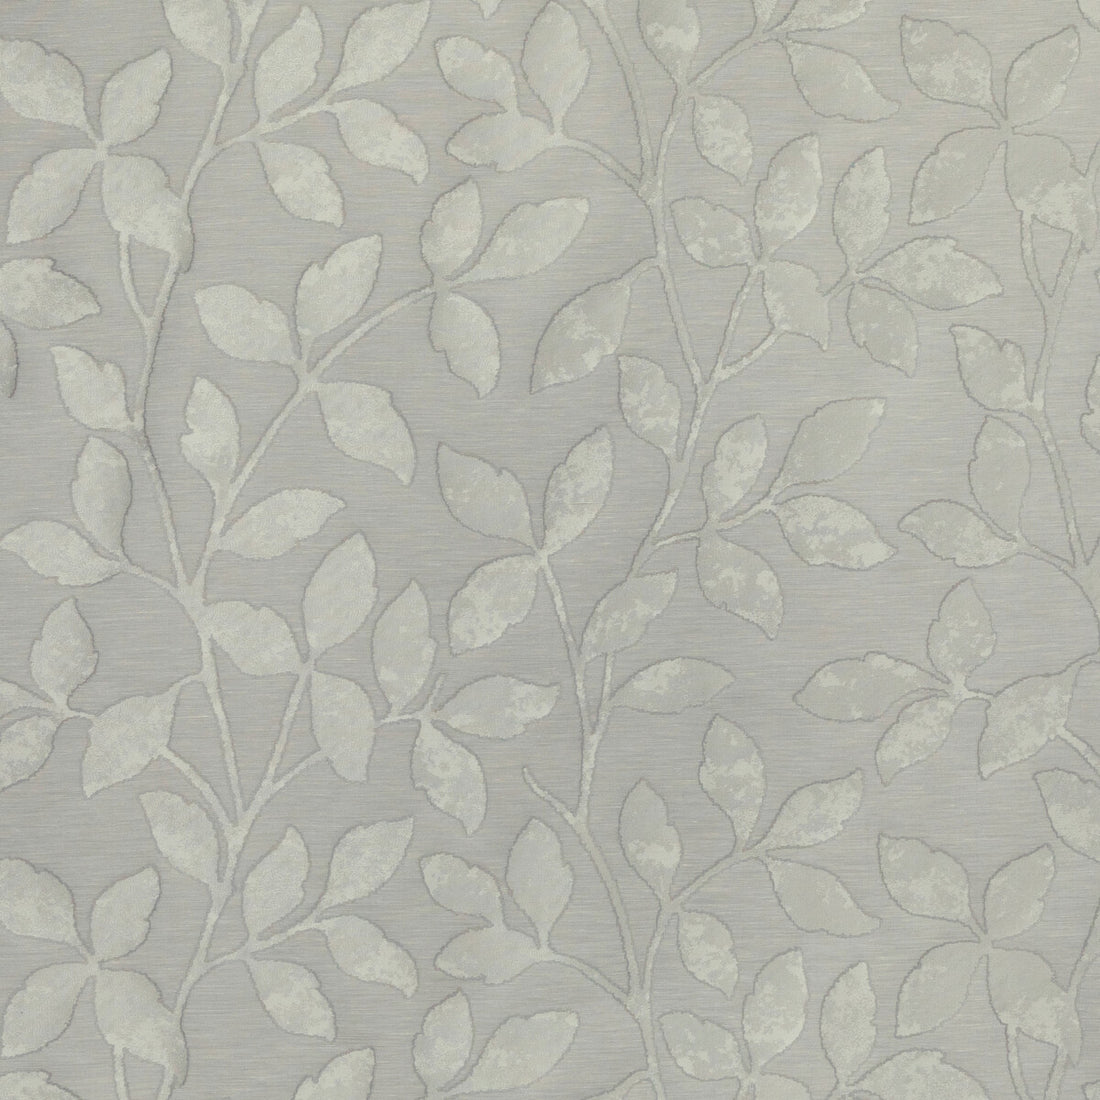 Leaf Me Alone fabric in platinum color - pattern 4997.11.0 - by Kravet Design in the Candice Olson collection